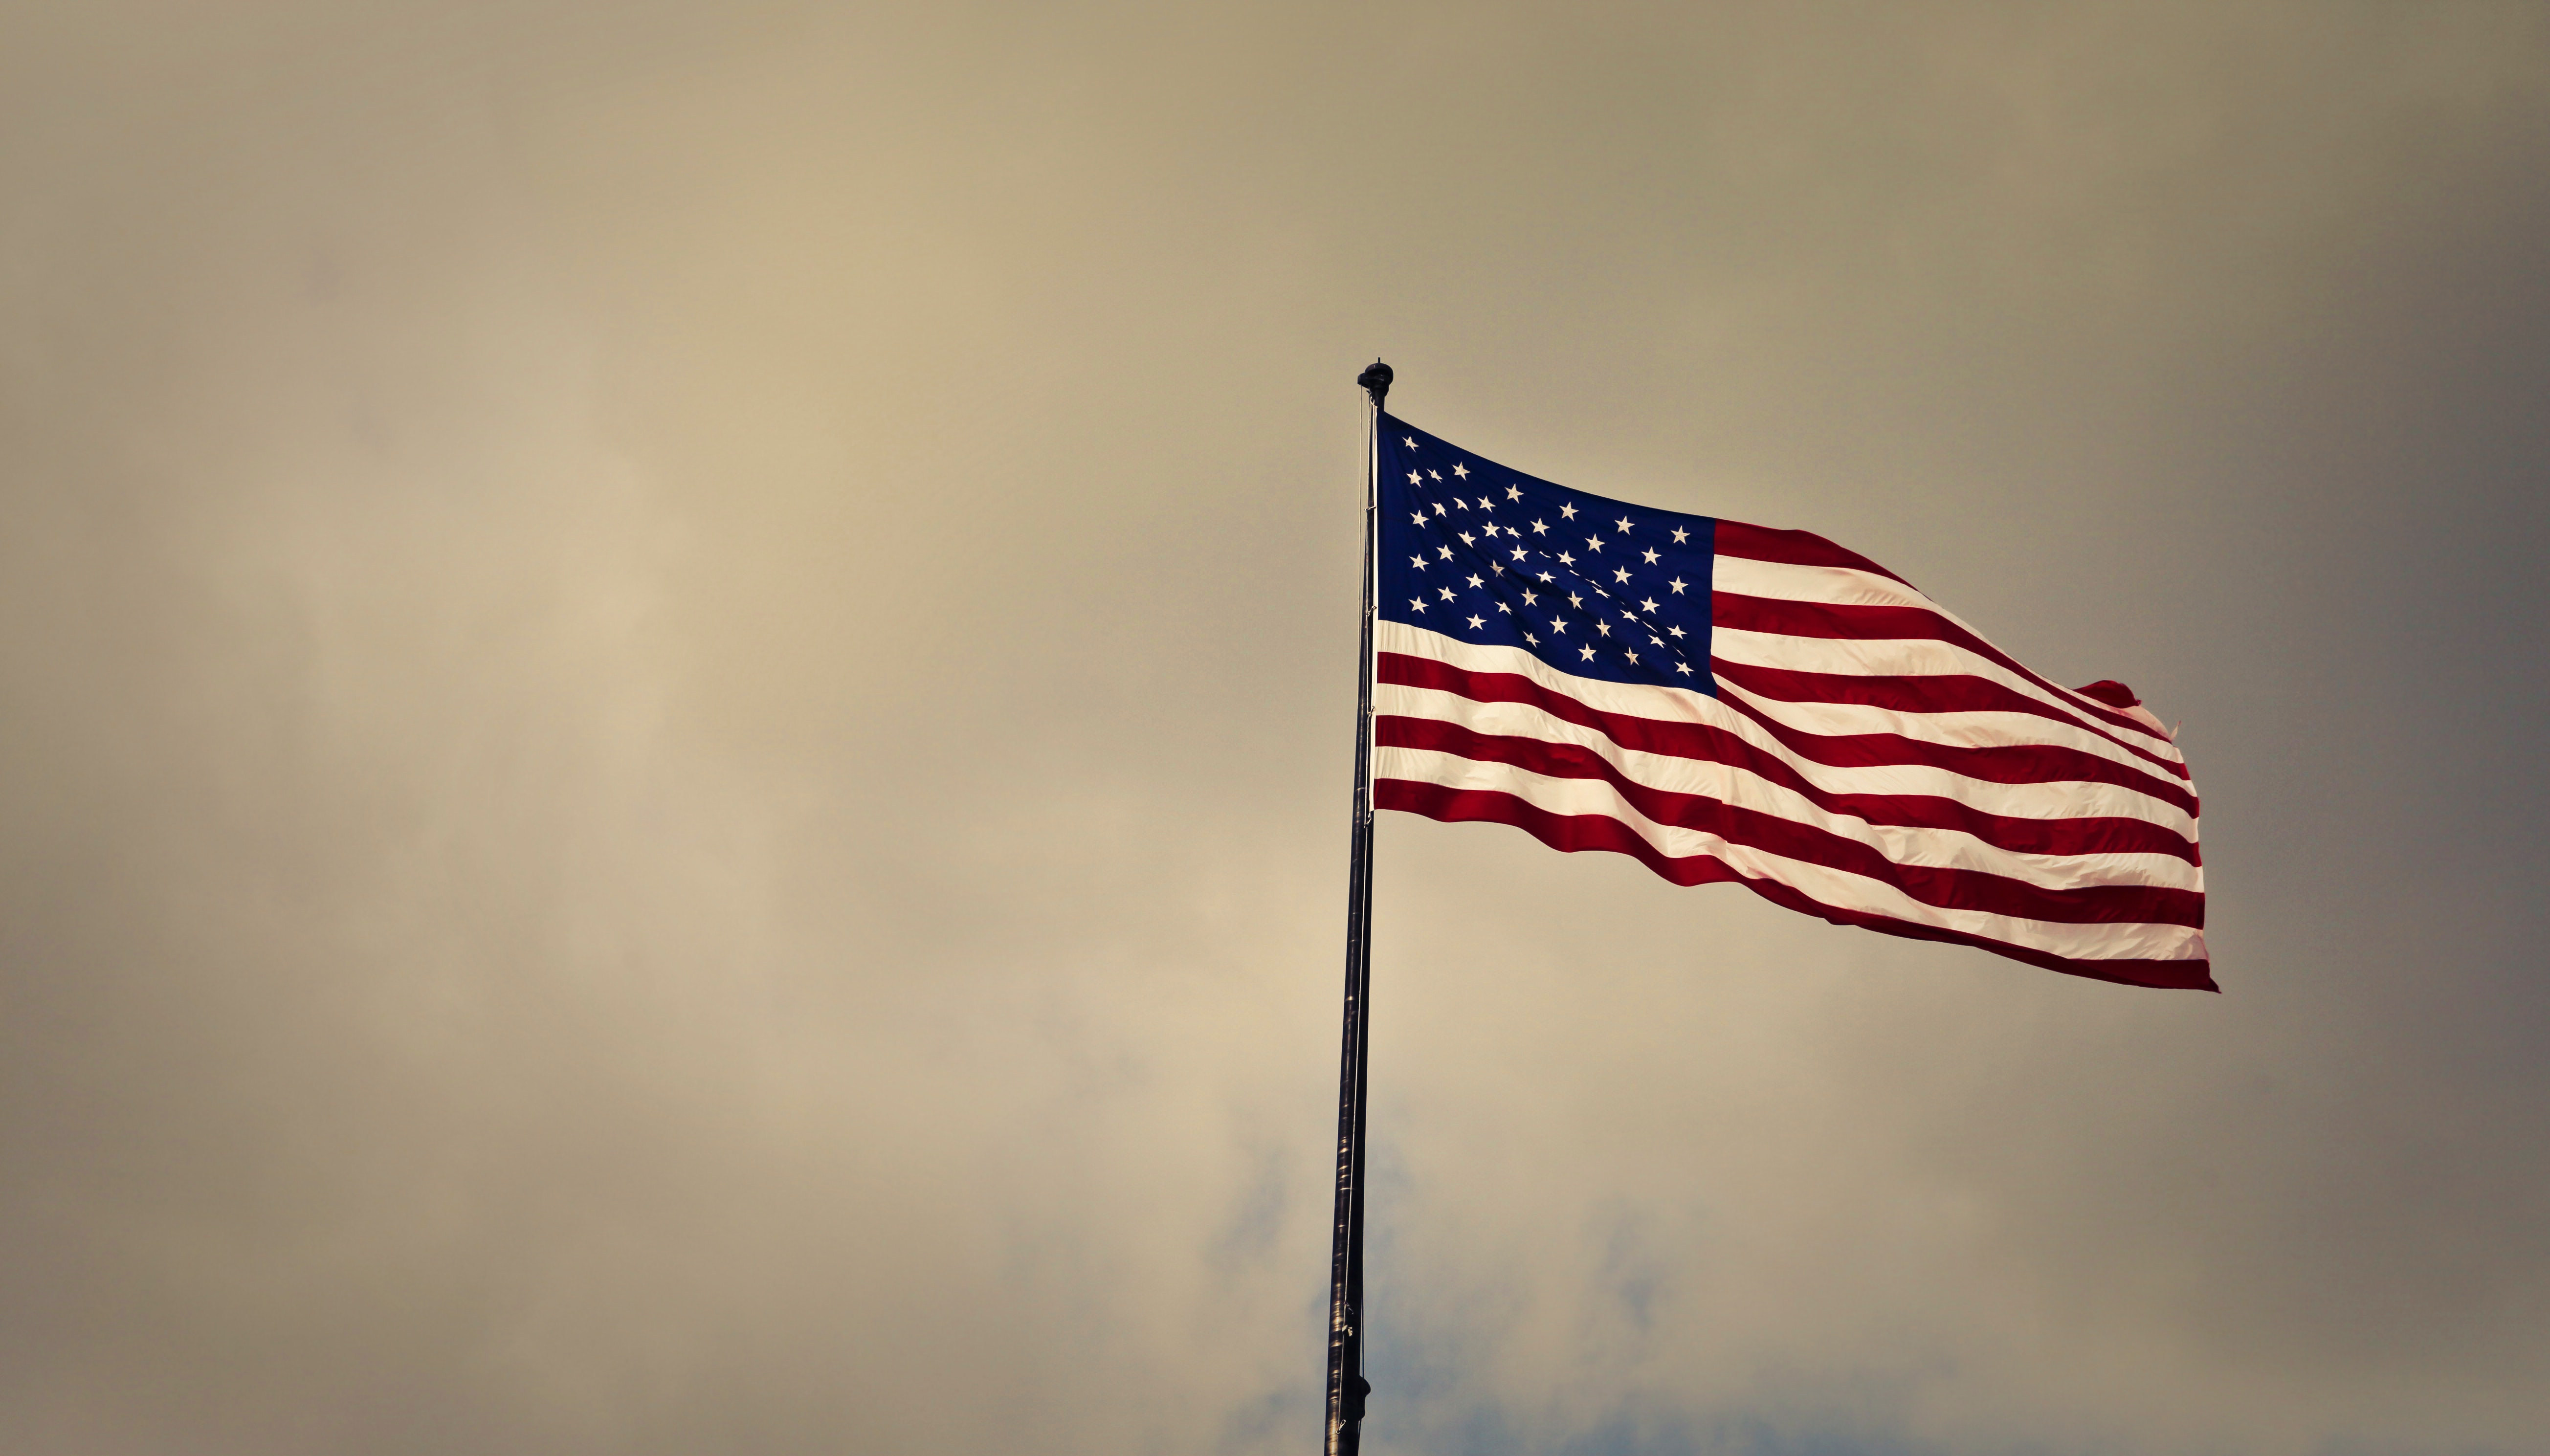 Photo of Cloudy Skies over American Flag, Administration, Gloomy, United states of america, Stripes, HQ Photo